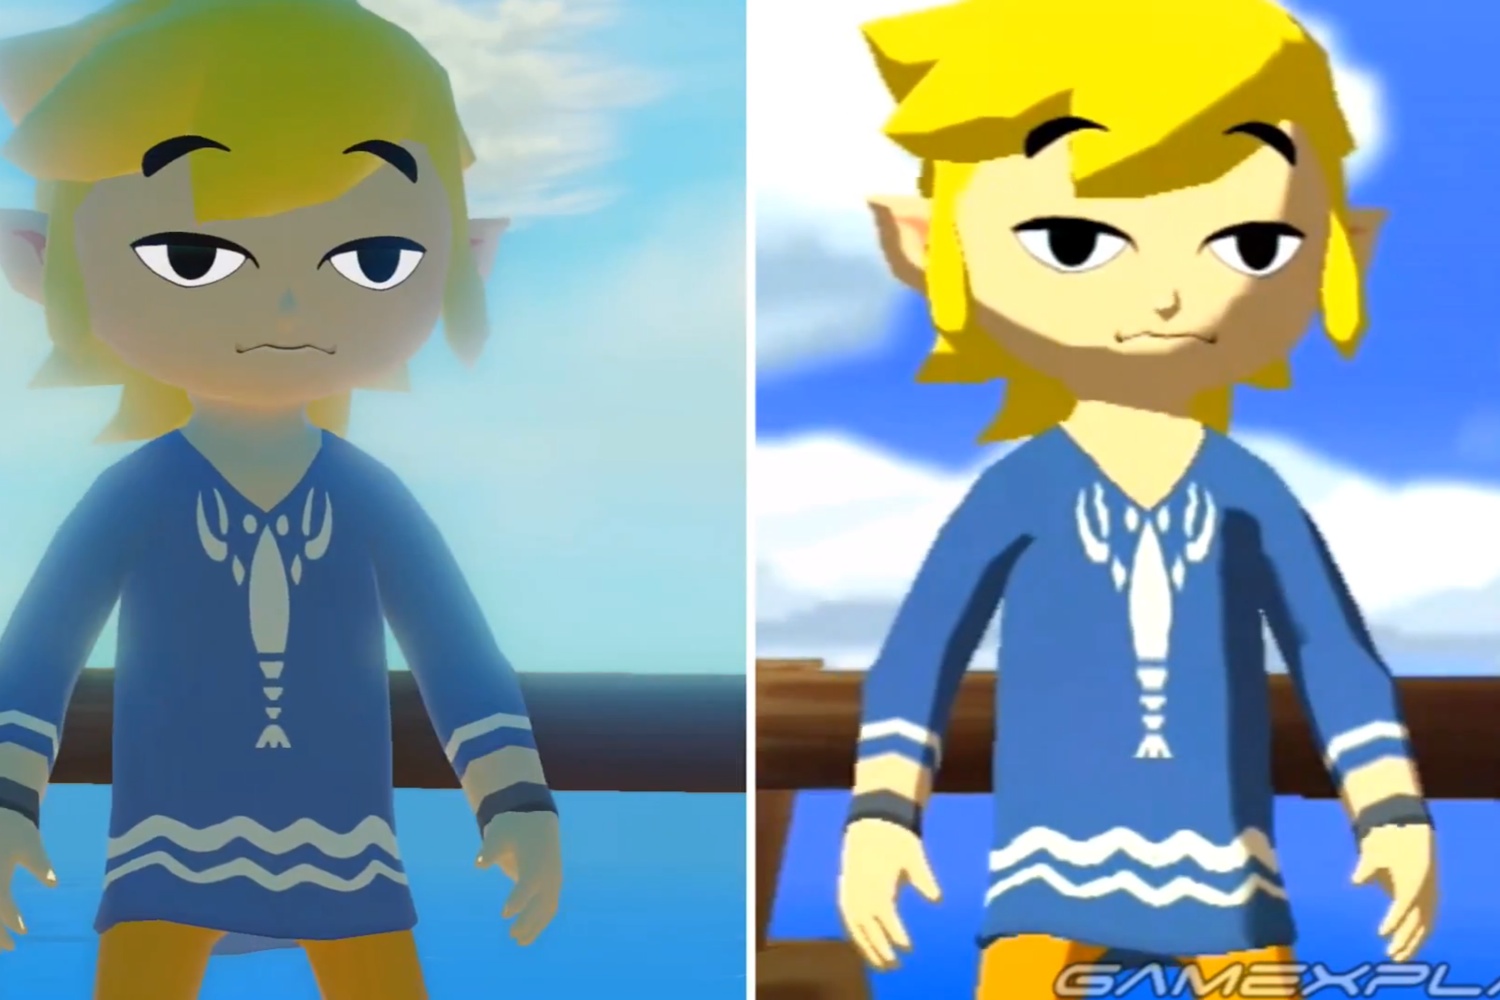 the-wind-waker-hd-might-as-well-be-zelda-no-kuni-time